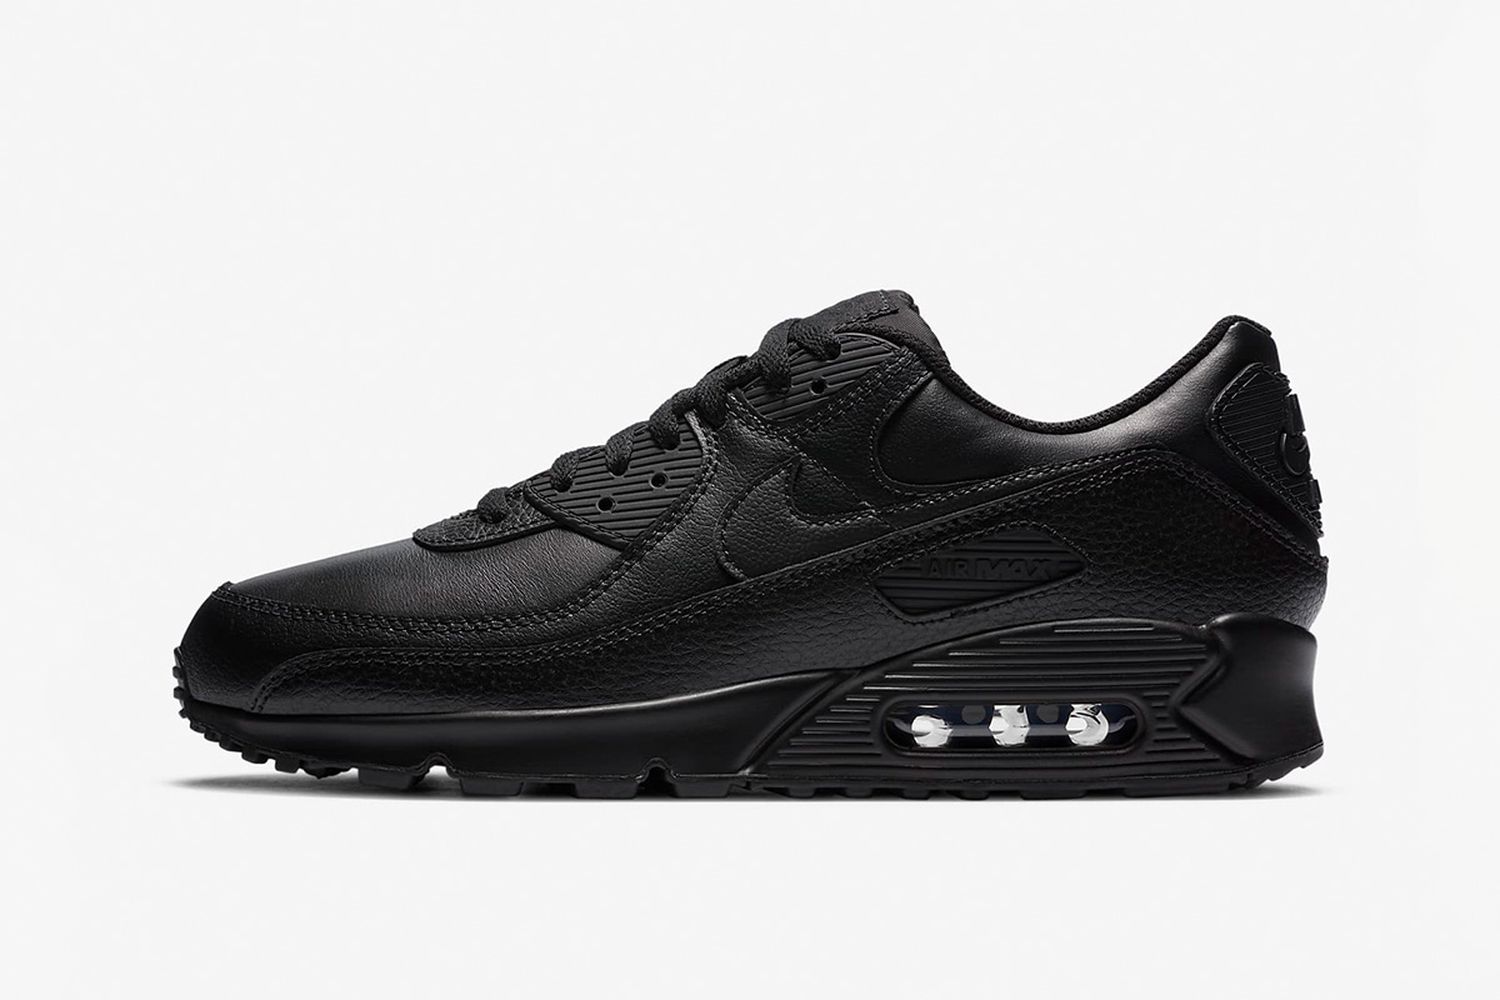 Shop the Most Legendary Nike Air Max Sneakers Here